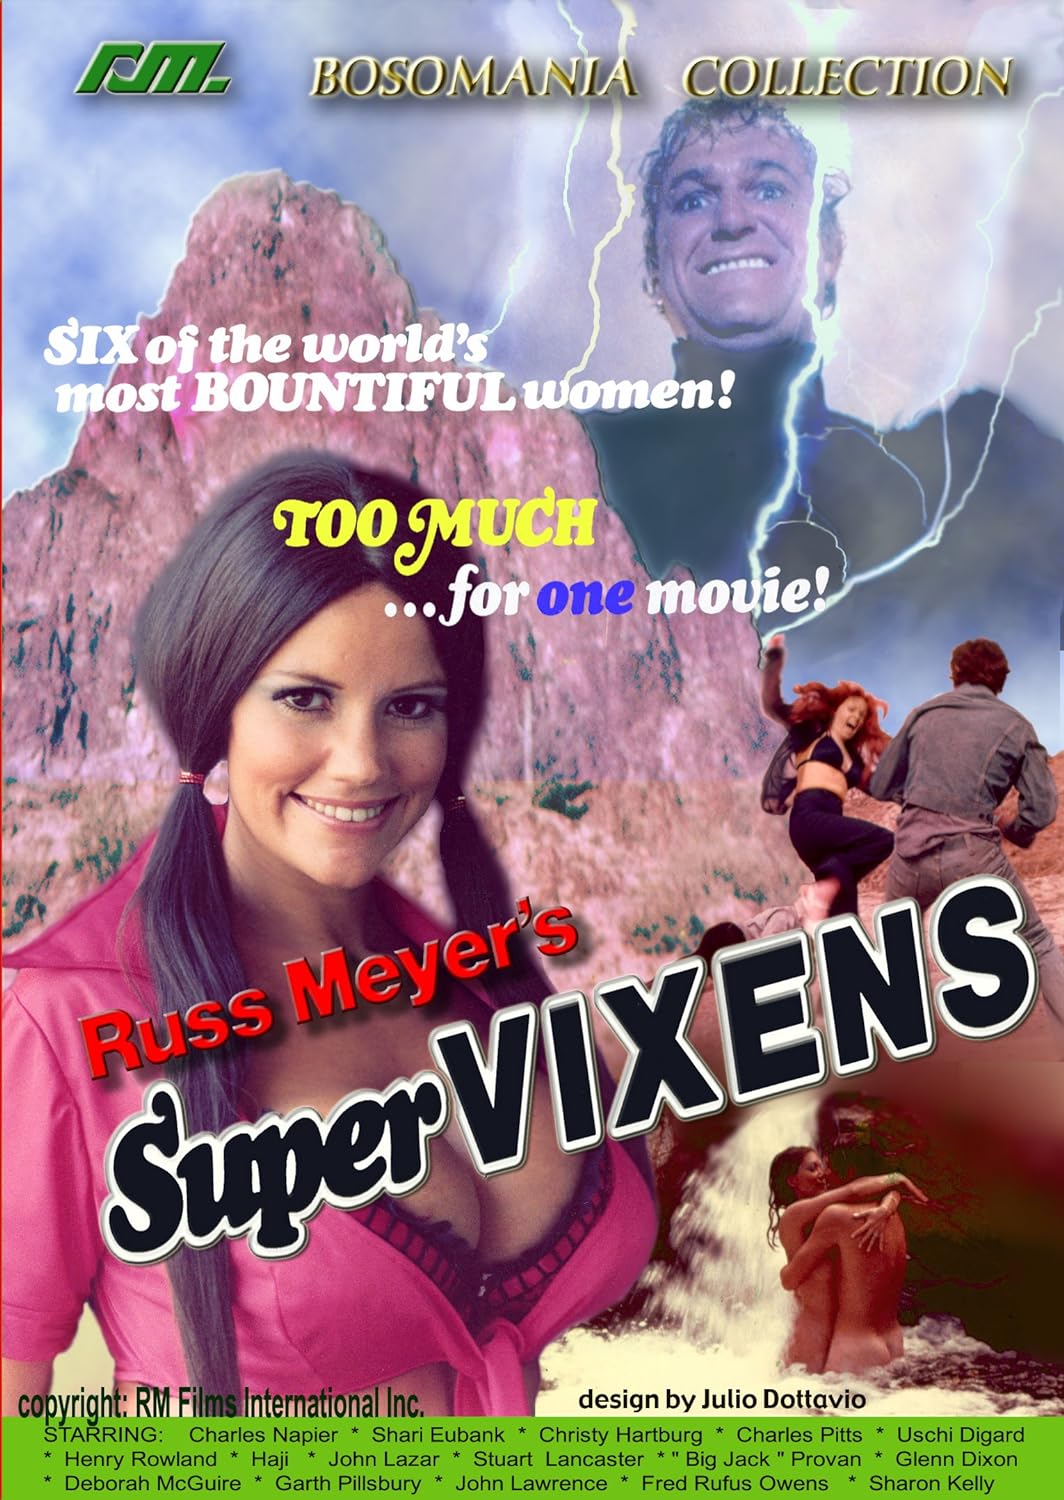 Russ meyers supervixens mobile porno videos movies